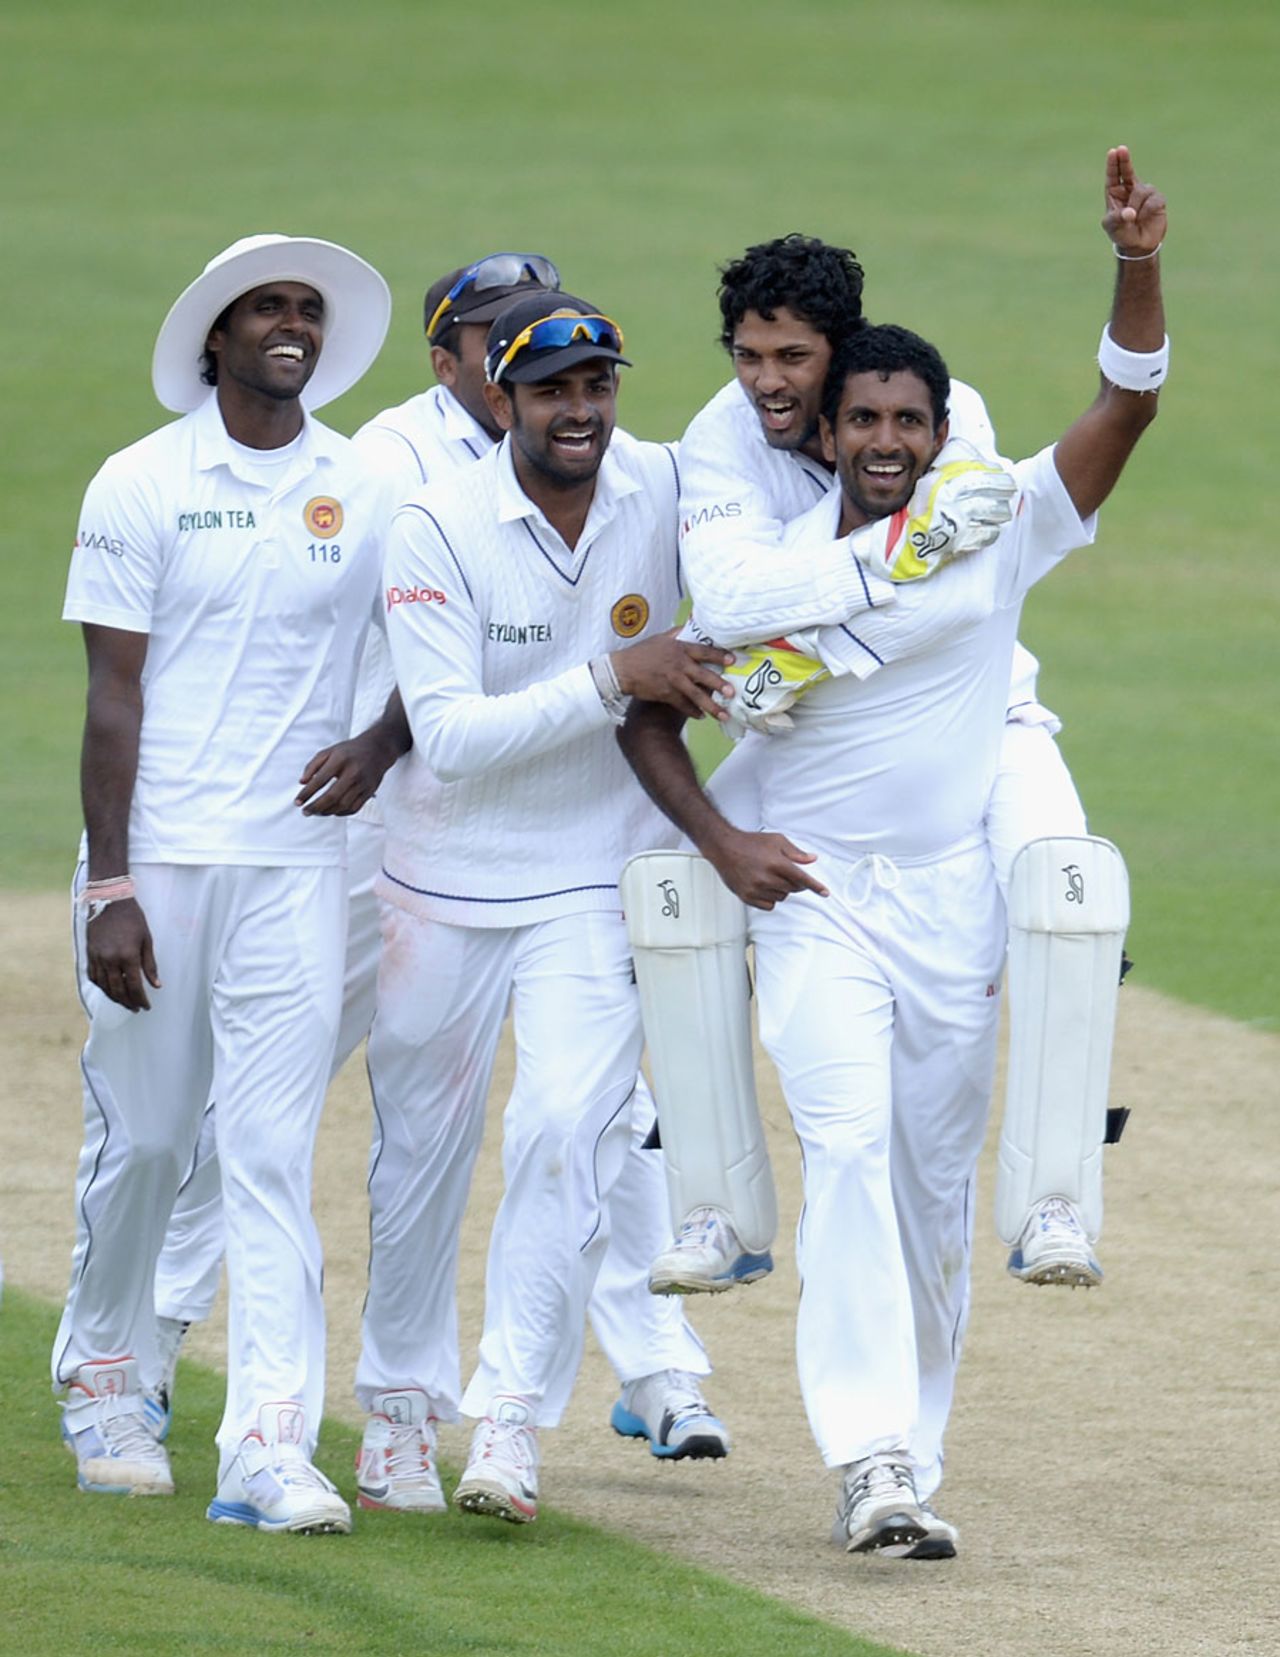 Dhammika Prasad is mobbed after his fifth wicket, England v Sri Lanka, 2nd Investec Test, Headingley, 5th day, June 24, 2014